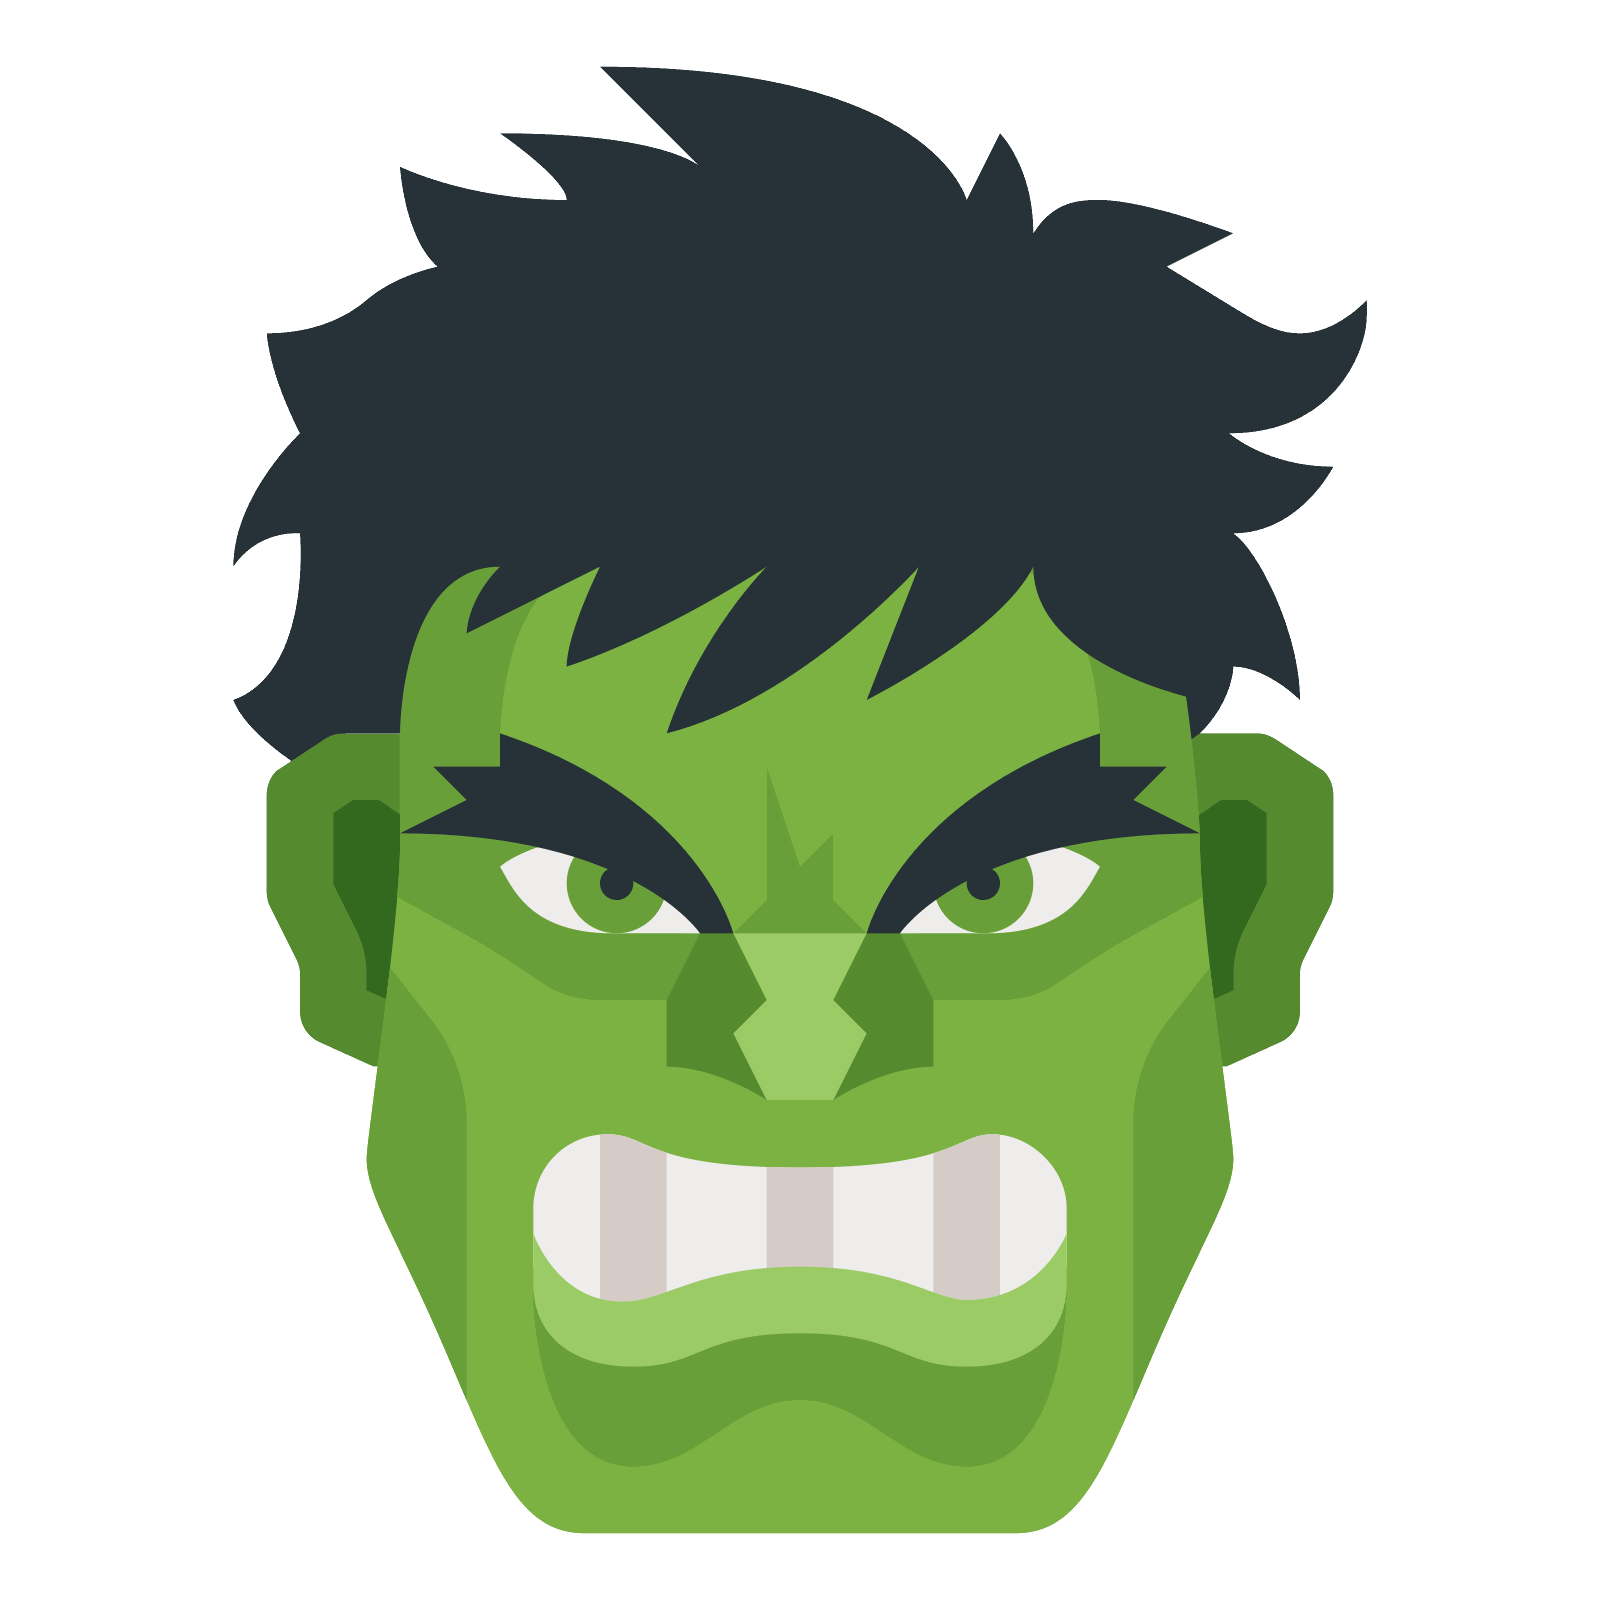 Happy Hulk Icon Png Clipart Image Hulk Icon Clip Art | Images and ...